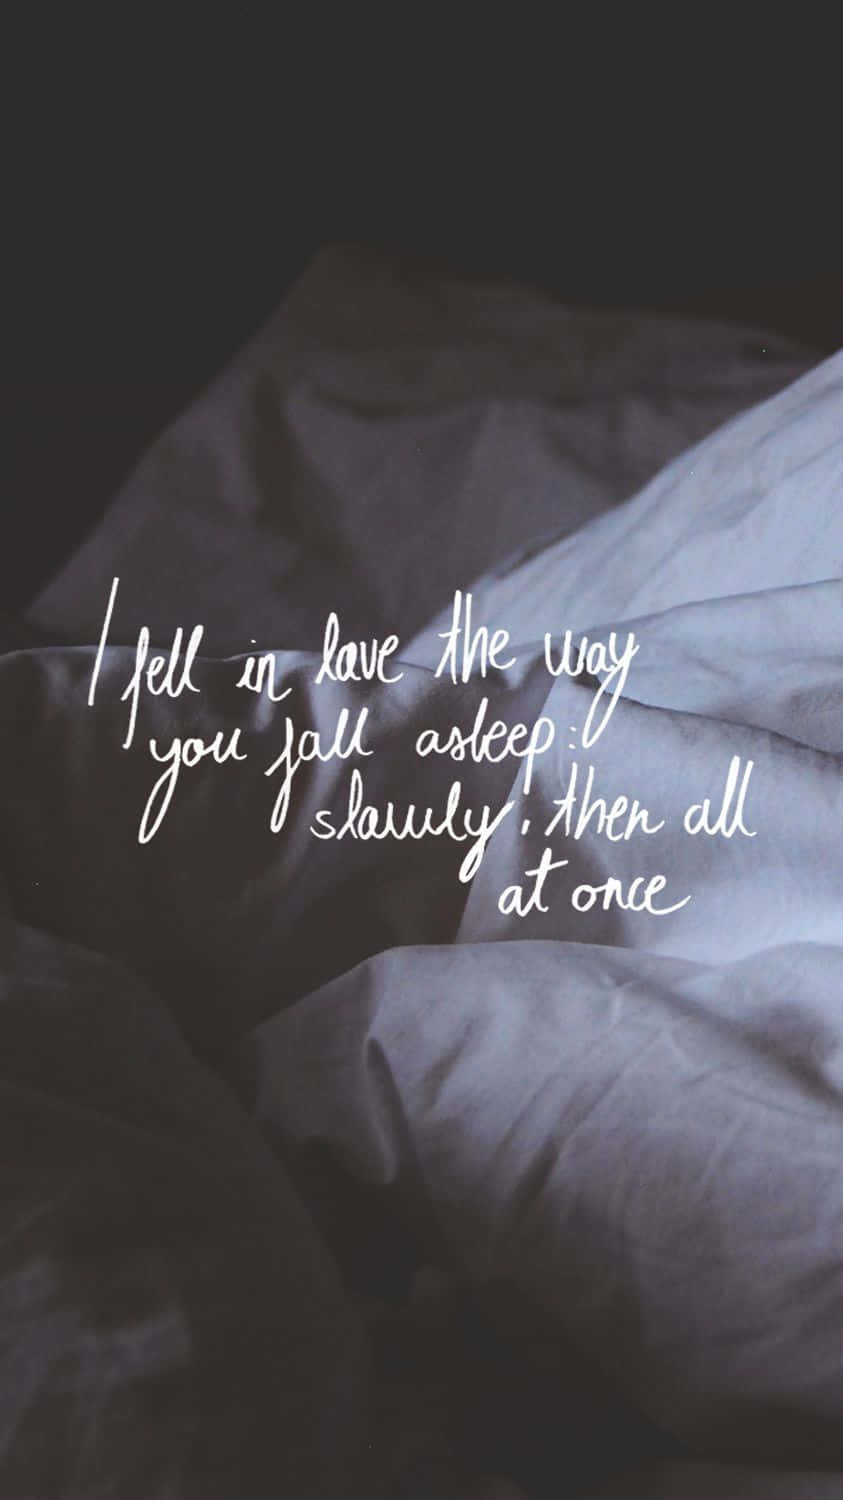 A Bed With A Quote That Says, I'll Fall In Love The Way You Sleep